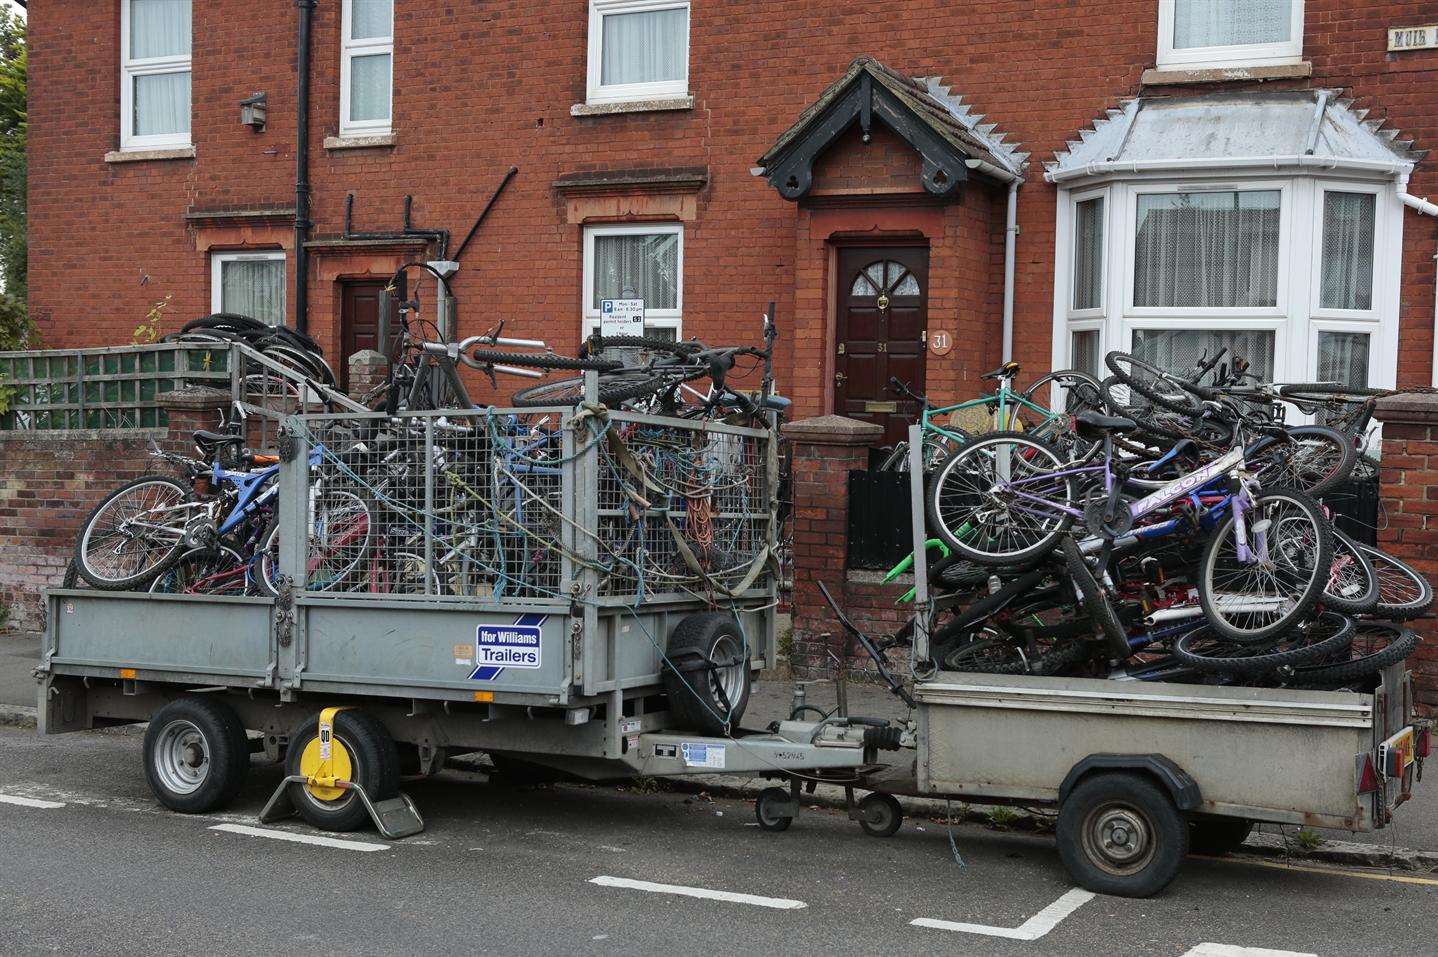 Maidstone Borough Council's parking department are powerless to act as the trailers full of bicycles are not attached to vehicles